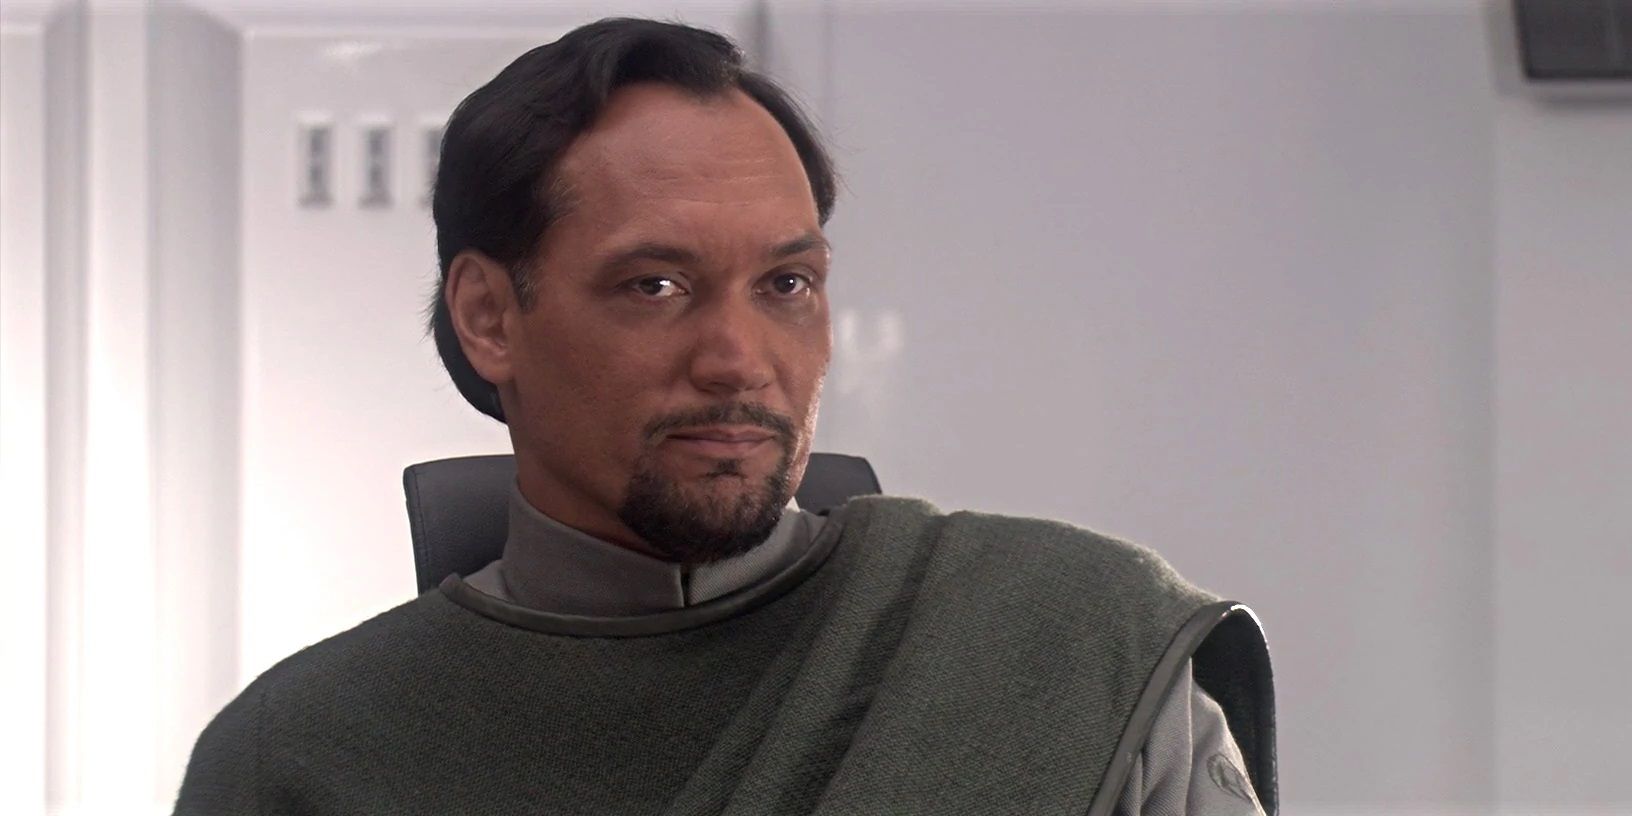 Bail_Organa_on_Tantive_IV_in_Revenge_of_the_Sith